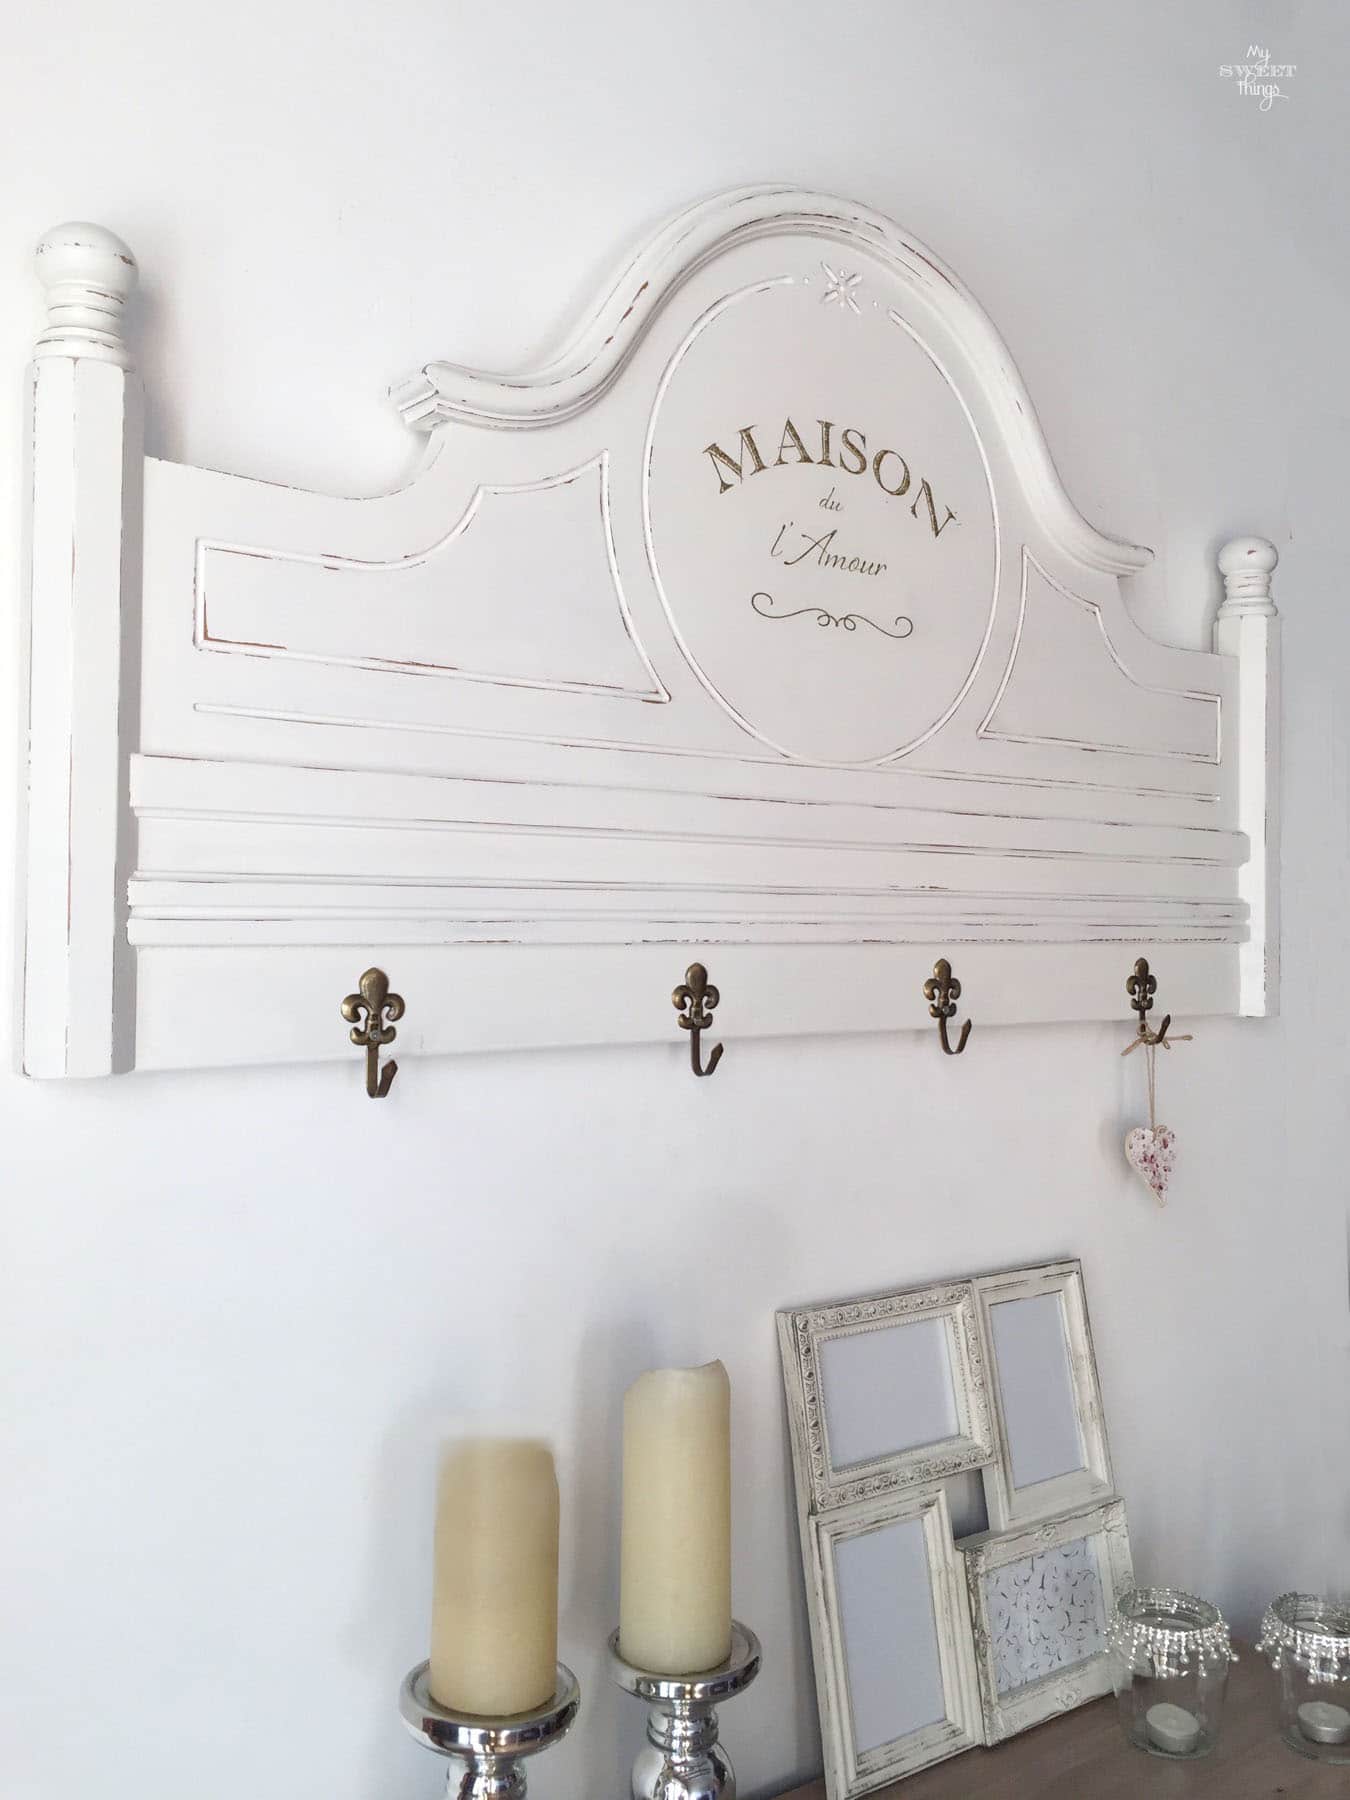 How to make a coat rack from a footboard  ·  Via www.sweethings.net